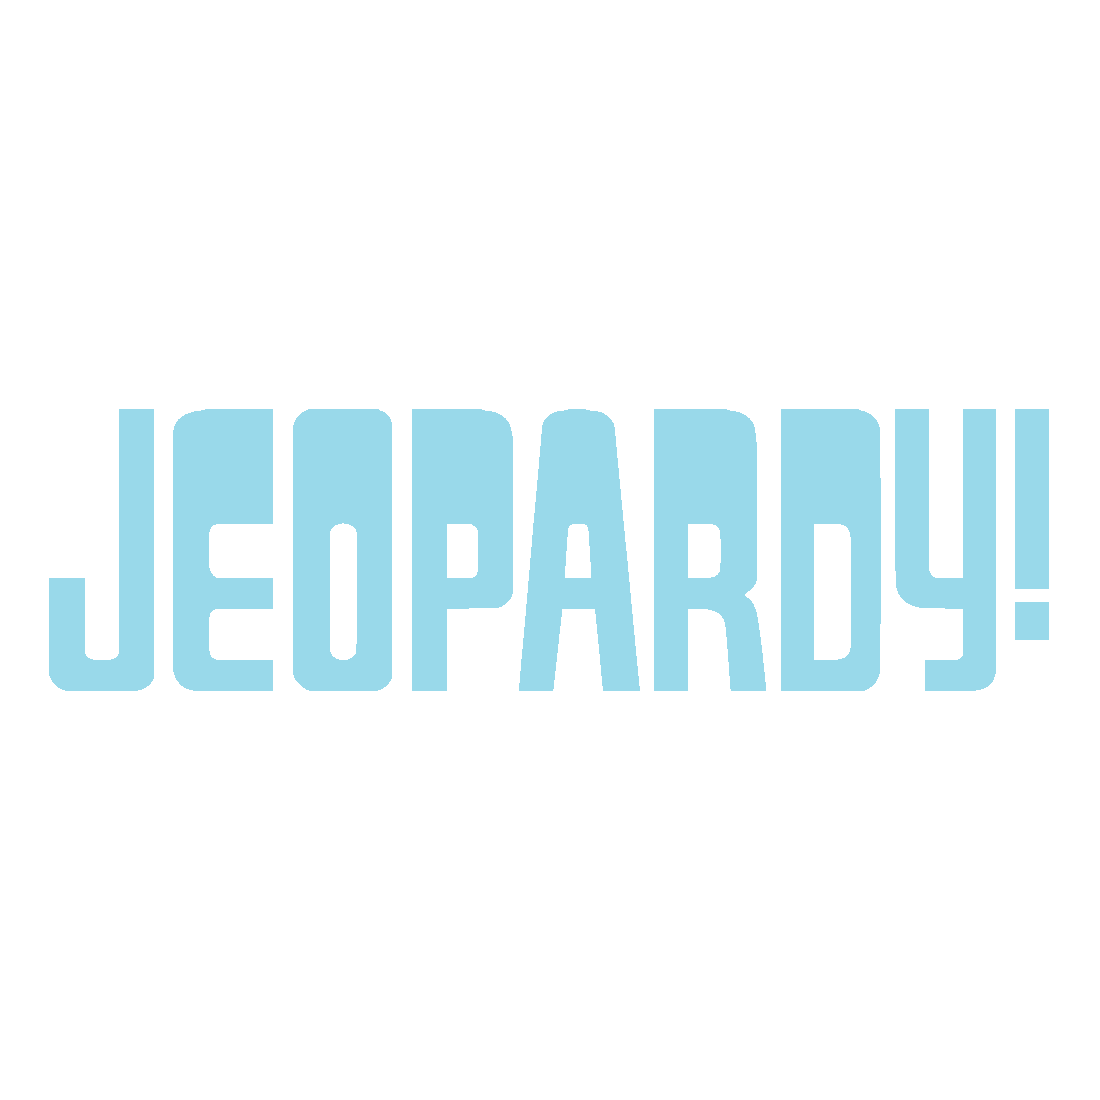 Image - Jeopardy! Logo in White Background in Aqua Blue Letters ...